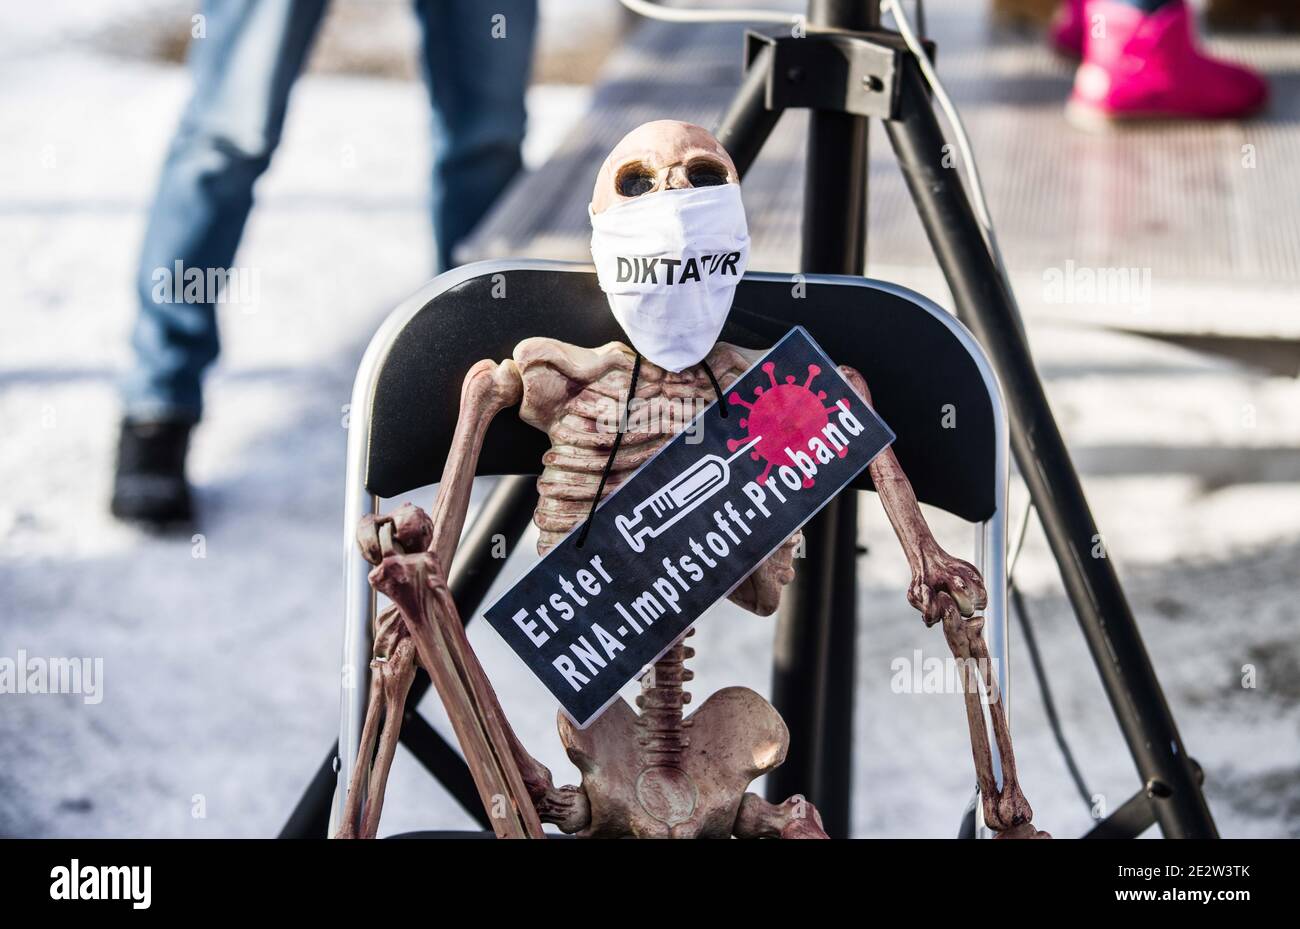 Fuerstenfeldbruck, Bavaria, Germany. 15th Jan, 2021. The so-called Corona rebels in Bavaria use a skeleton with the words ''Diktatur'' (dictatorship) and ''first test subject'' to mock the mRNA vaccine. Organized by the Querdenken/Corona Rebel participating 'Polizeifuer Aufklaerung'' group (Police for Education), a demonstration was held at theoffices of the Fuerstenfeldbruck Criminal Police Unit (Kriminalpolizei, KriPo).Â The FFB KriPo raided the offices of prominenthomeopath doctor Rolf Kron in Kaufering who is alleged to have been producingfake medical certificates for Coronaanti-mas Stock Photo